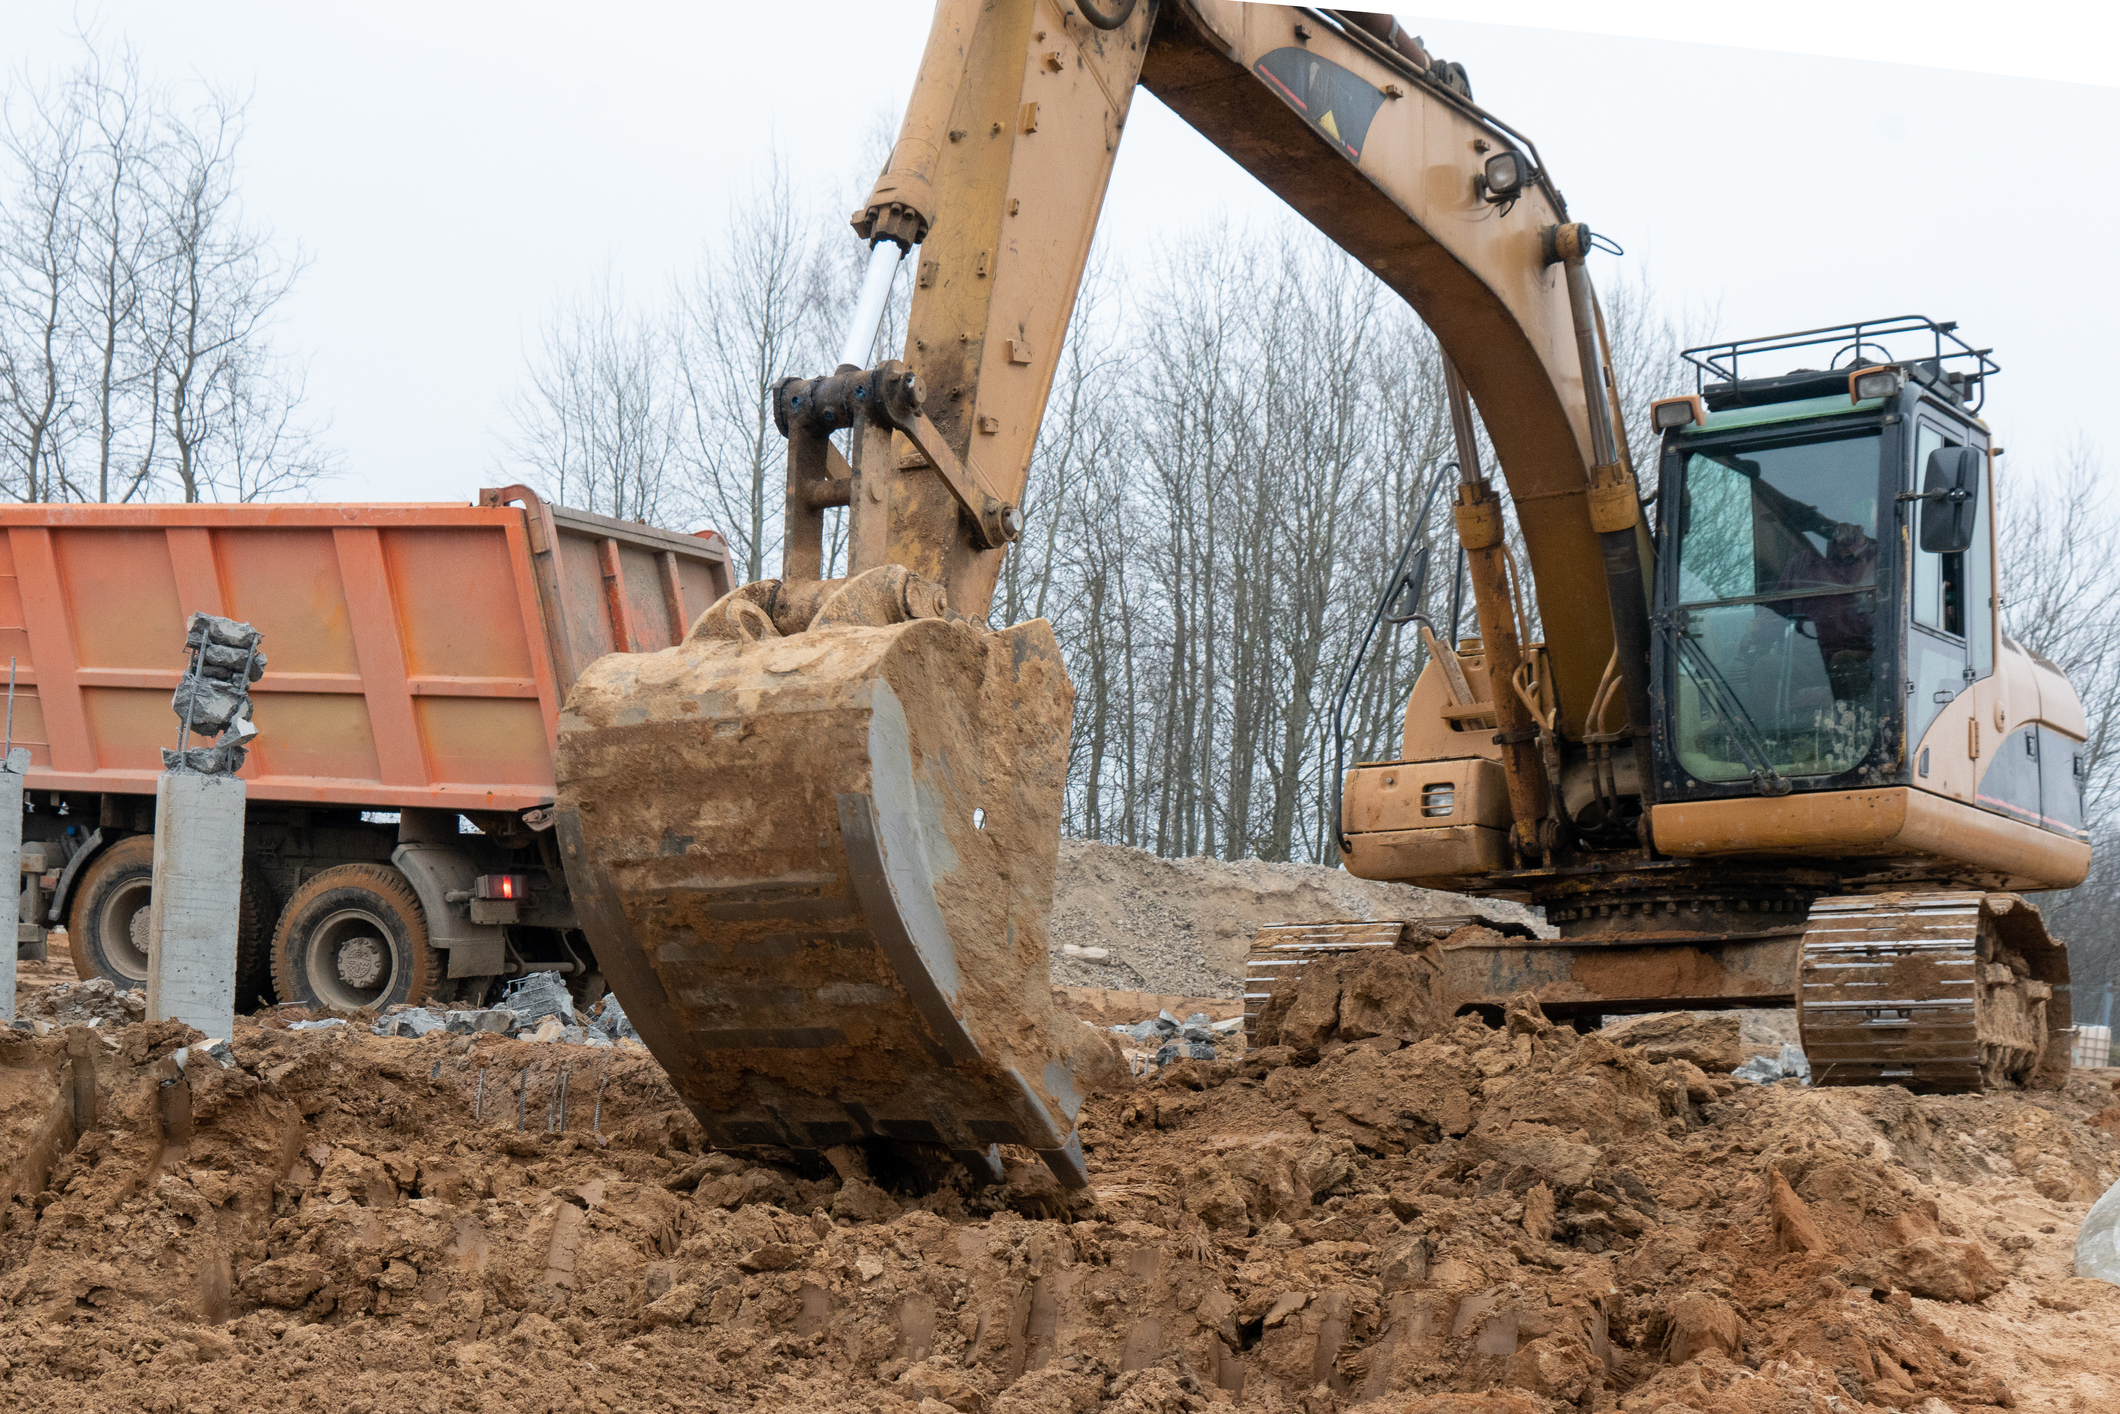 Photograph of an excavation site being prepped for septic tank installation